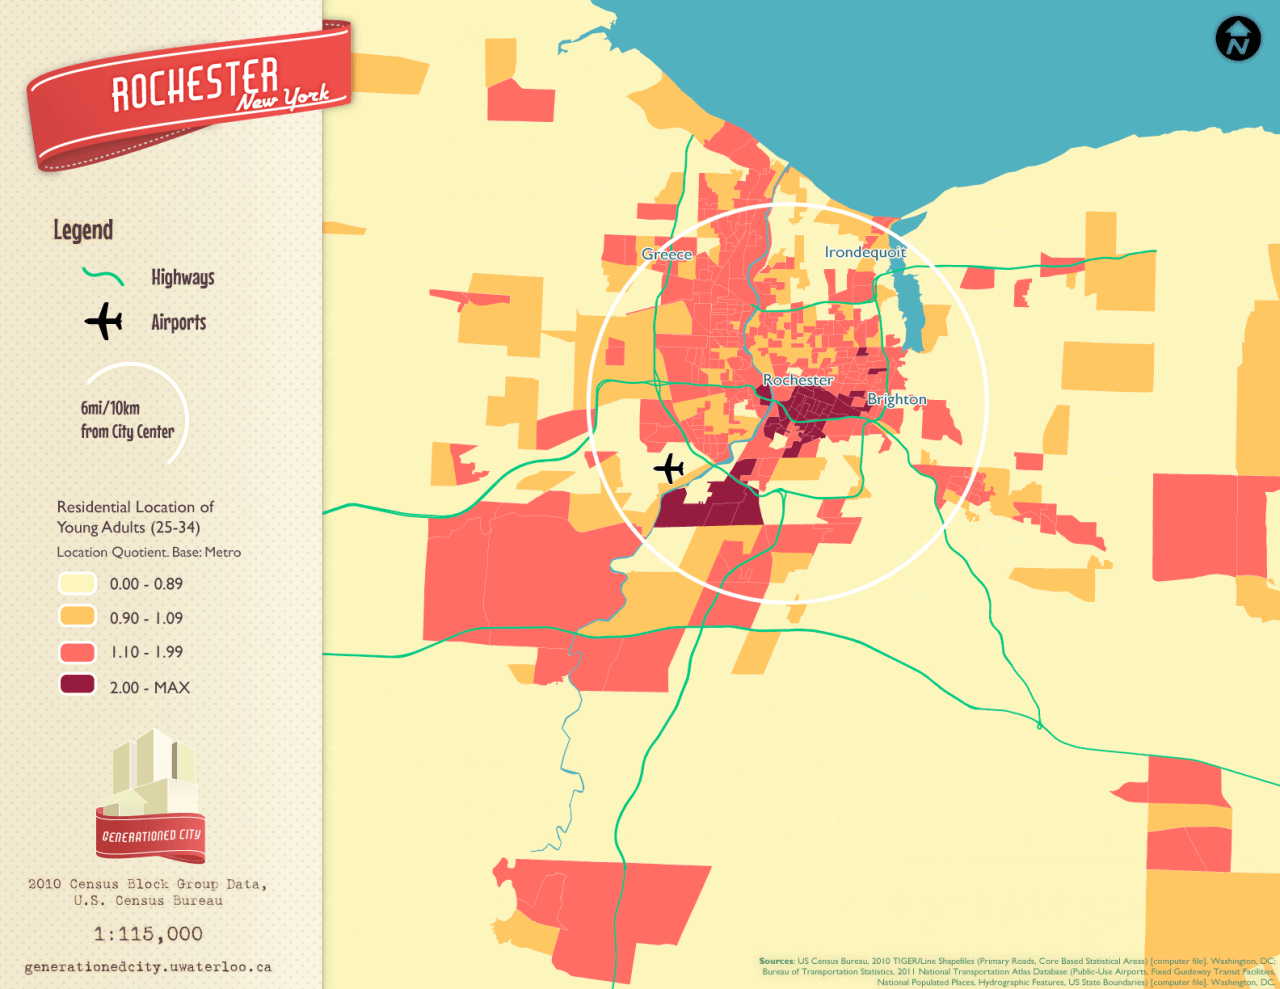 Residential location of young adults in Rochester.